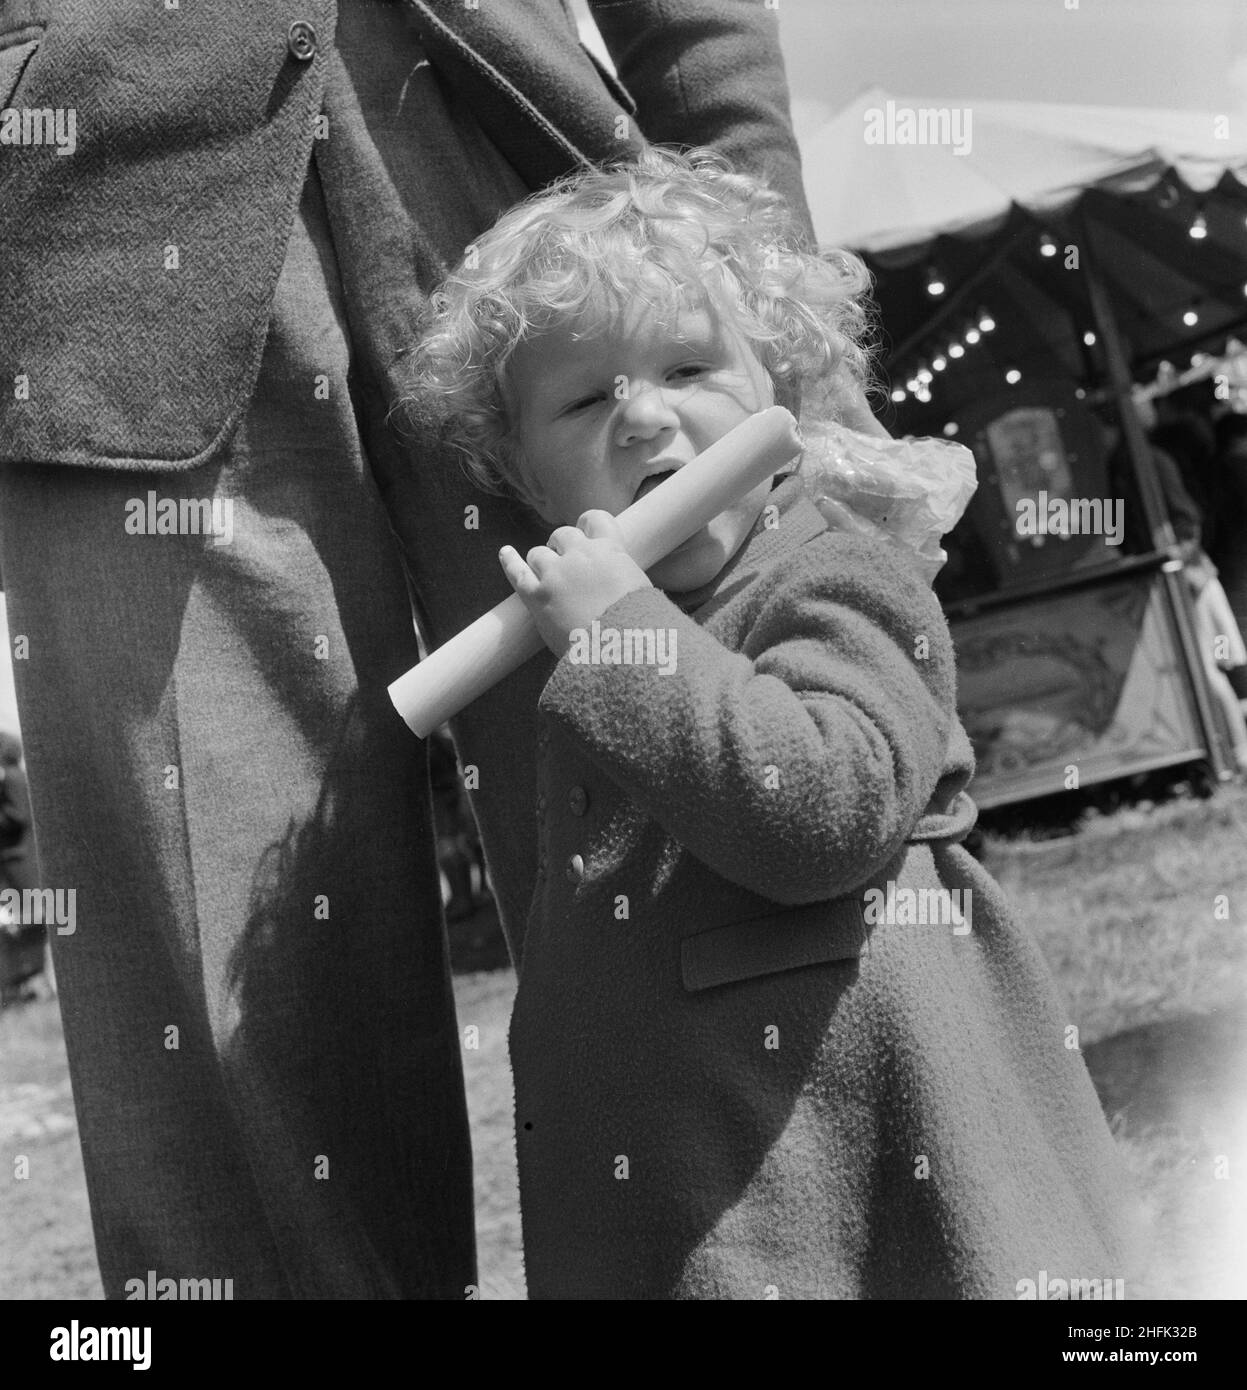 Minehead, West Somerset, Somerset, 28/05/1949. A portrait of a child eating a stick of rock during an outing of Laing staff and families to Minehead. This outing was for Laing staff from the South-West area, including contracts in Bristol, Boscombe Down, Swindon, Cirencester and Gloucestershire. Stock Photo